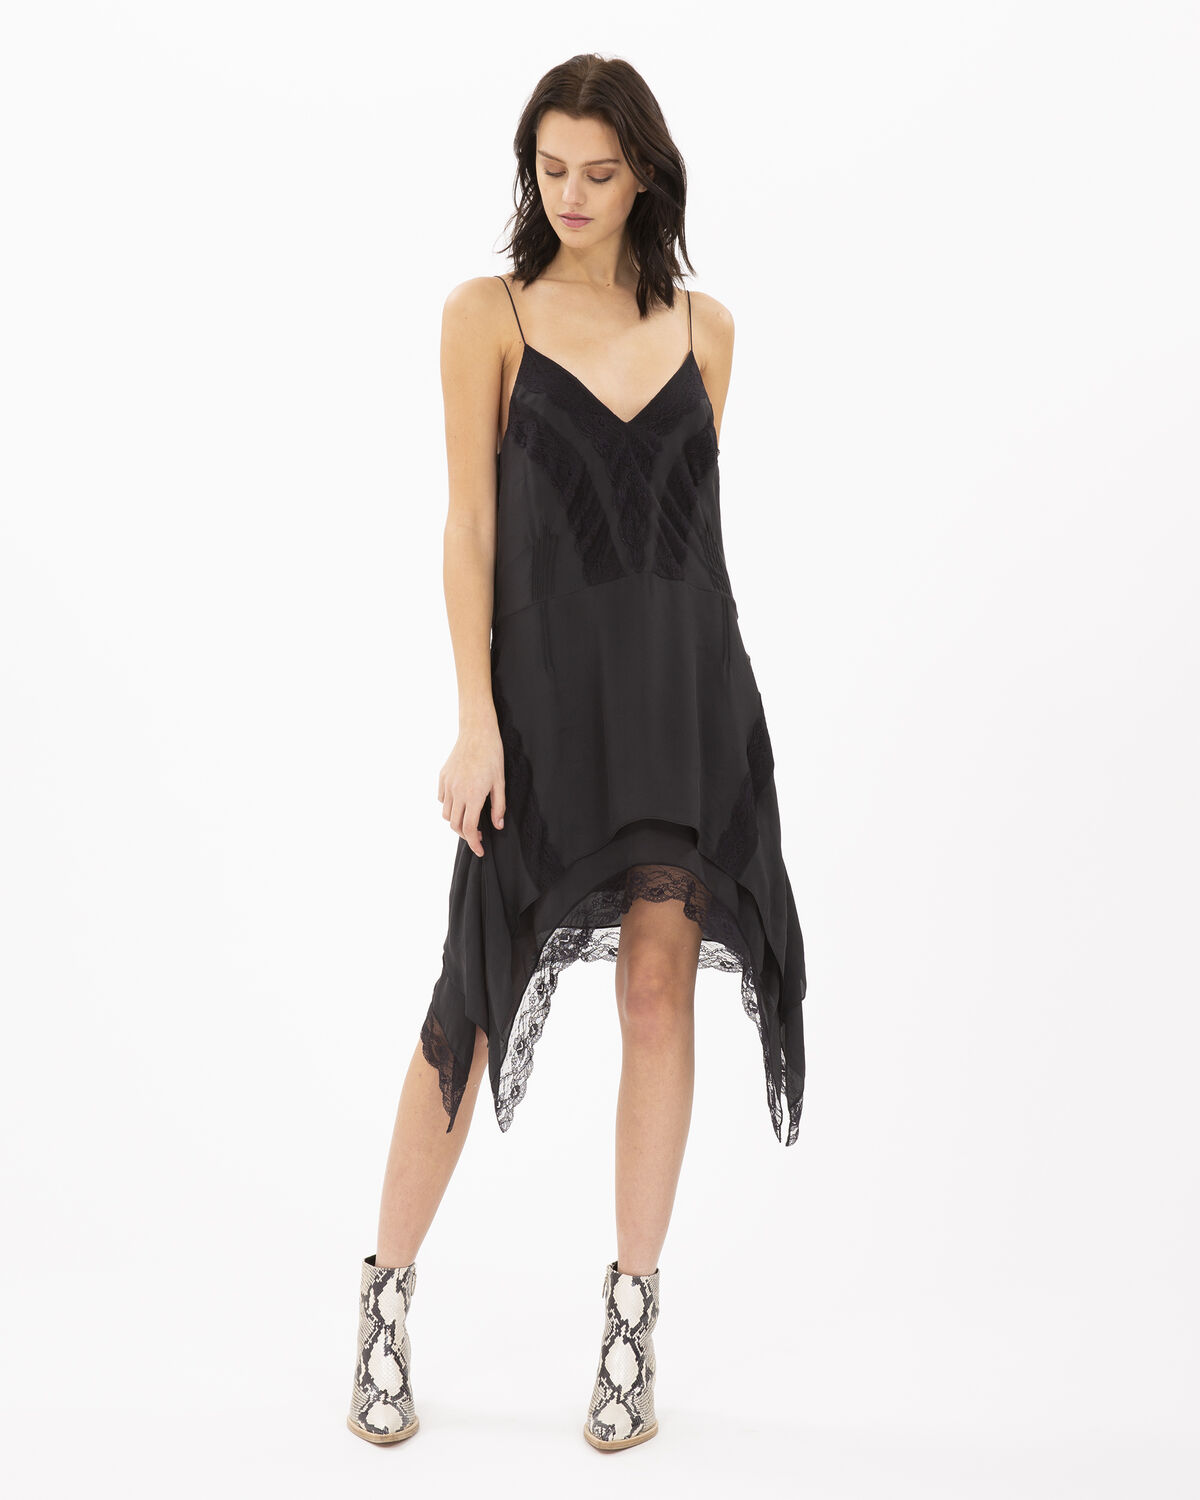 Photo of IRO Paris Gift Dress Black - Light And Fluid, This Cream Dress With Thin Straps Is Distinguished By Its Embroideries And Ruffles. Sophisticated And Elegant, Wear It With Boots For A Bohemian Rock Look. Dresses